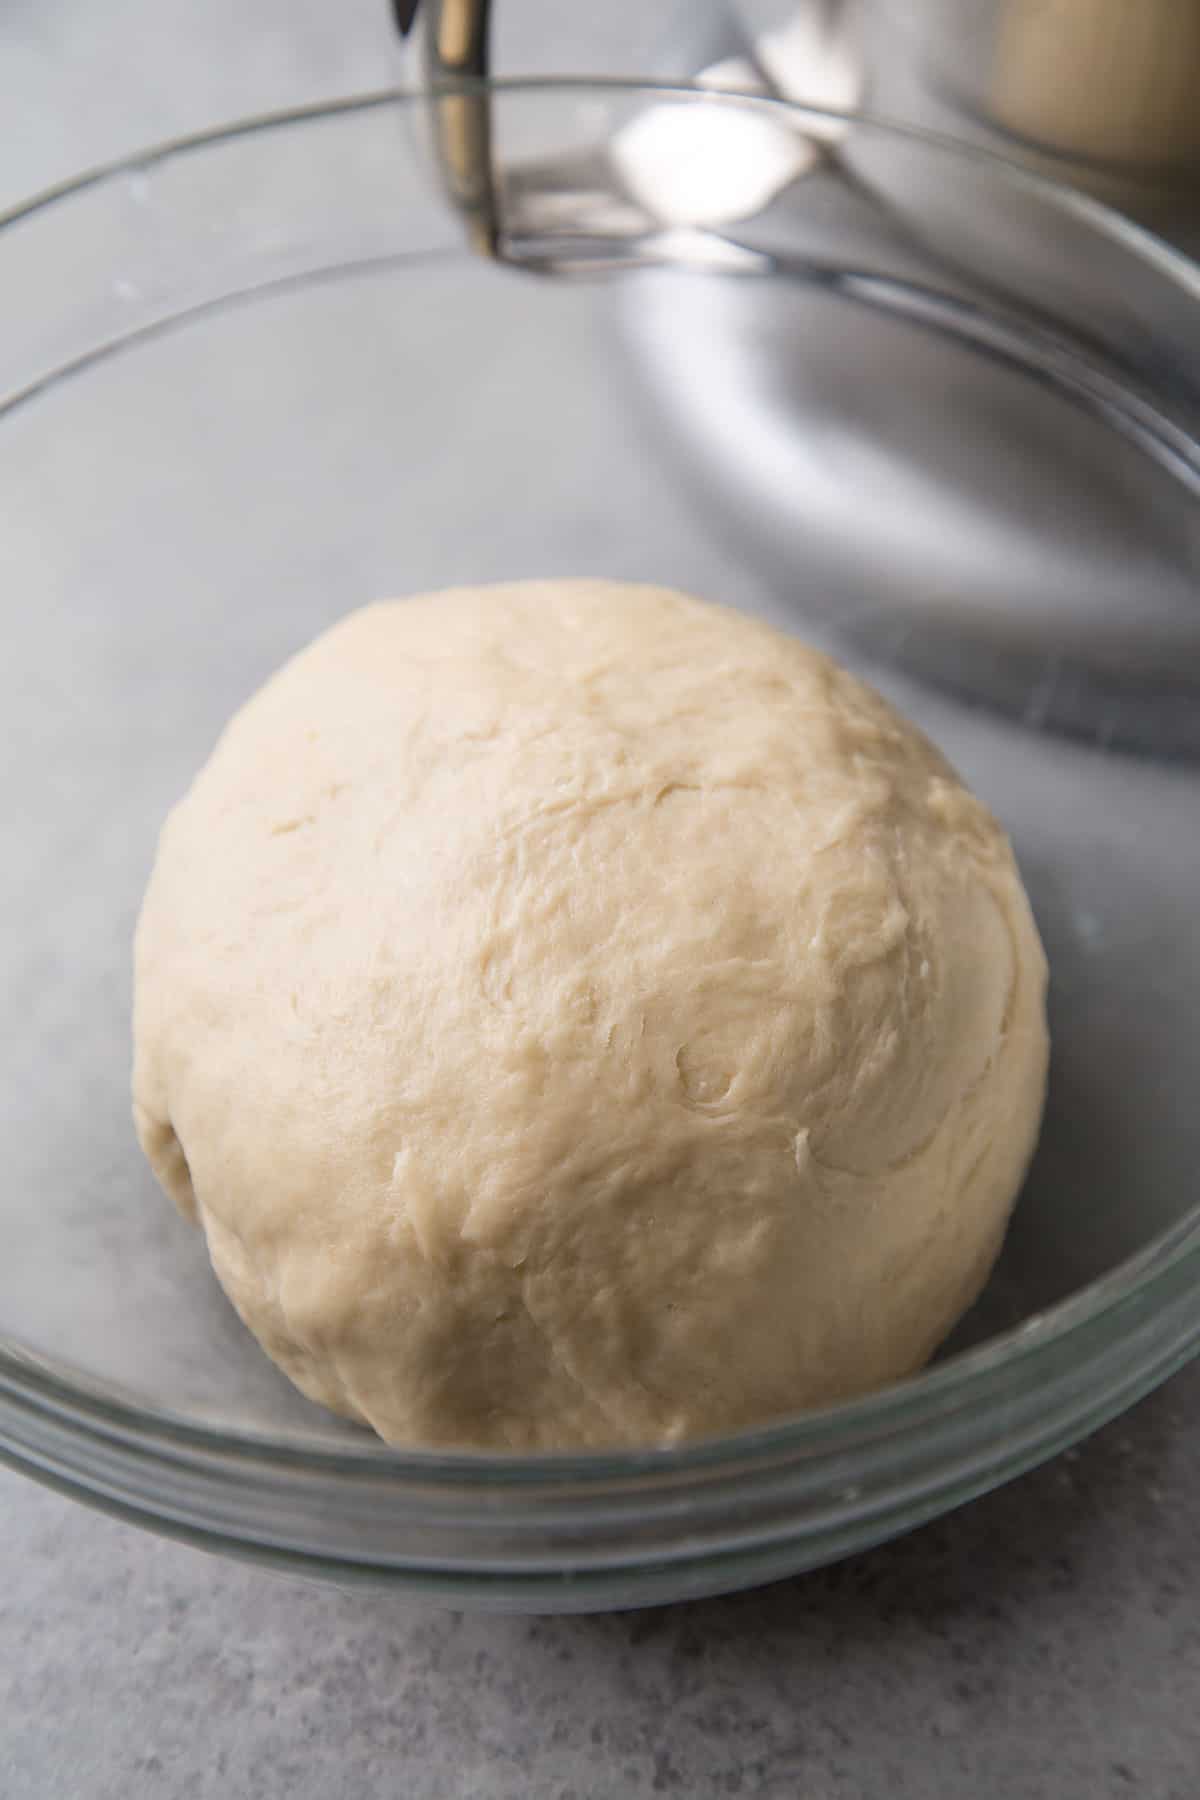 kneaded smooth dough ready to rest and rise.